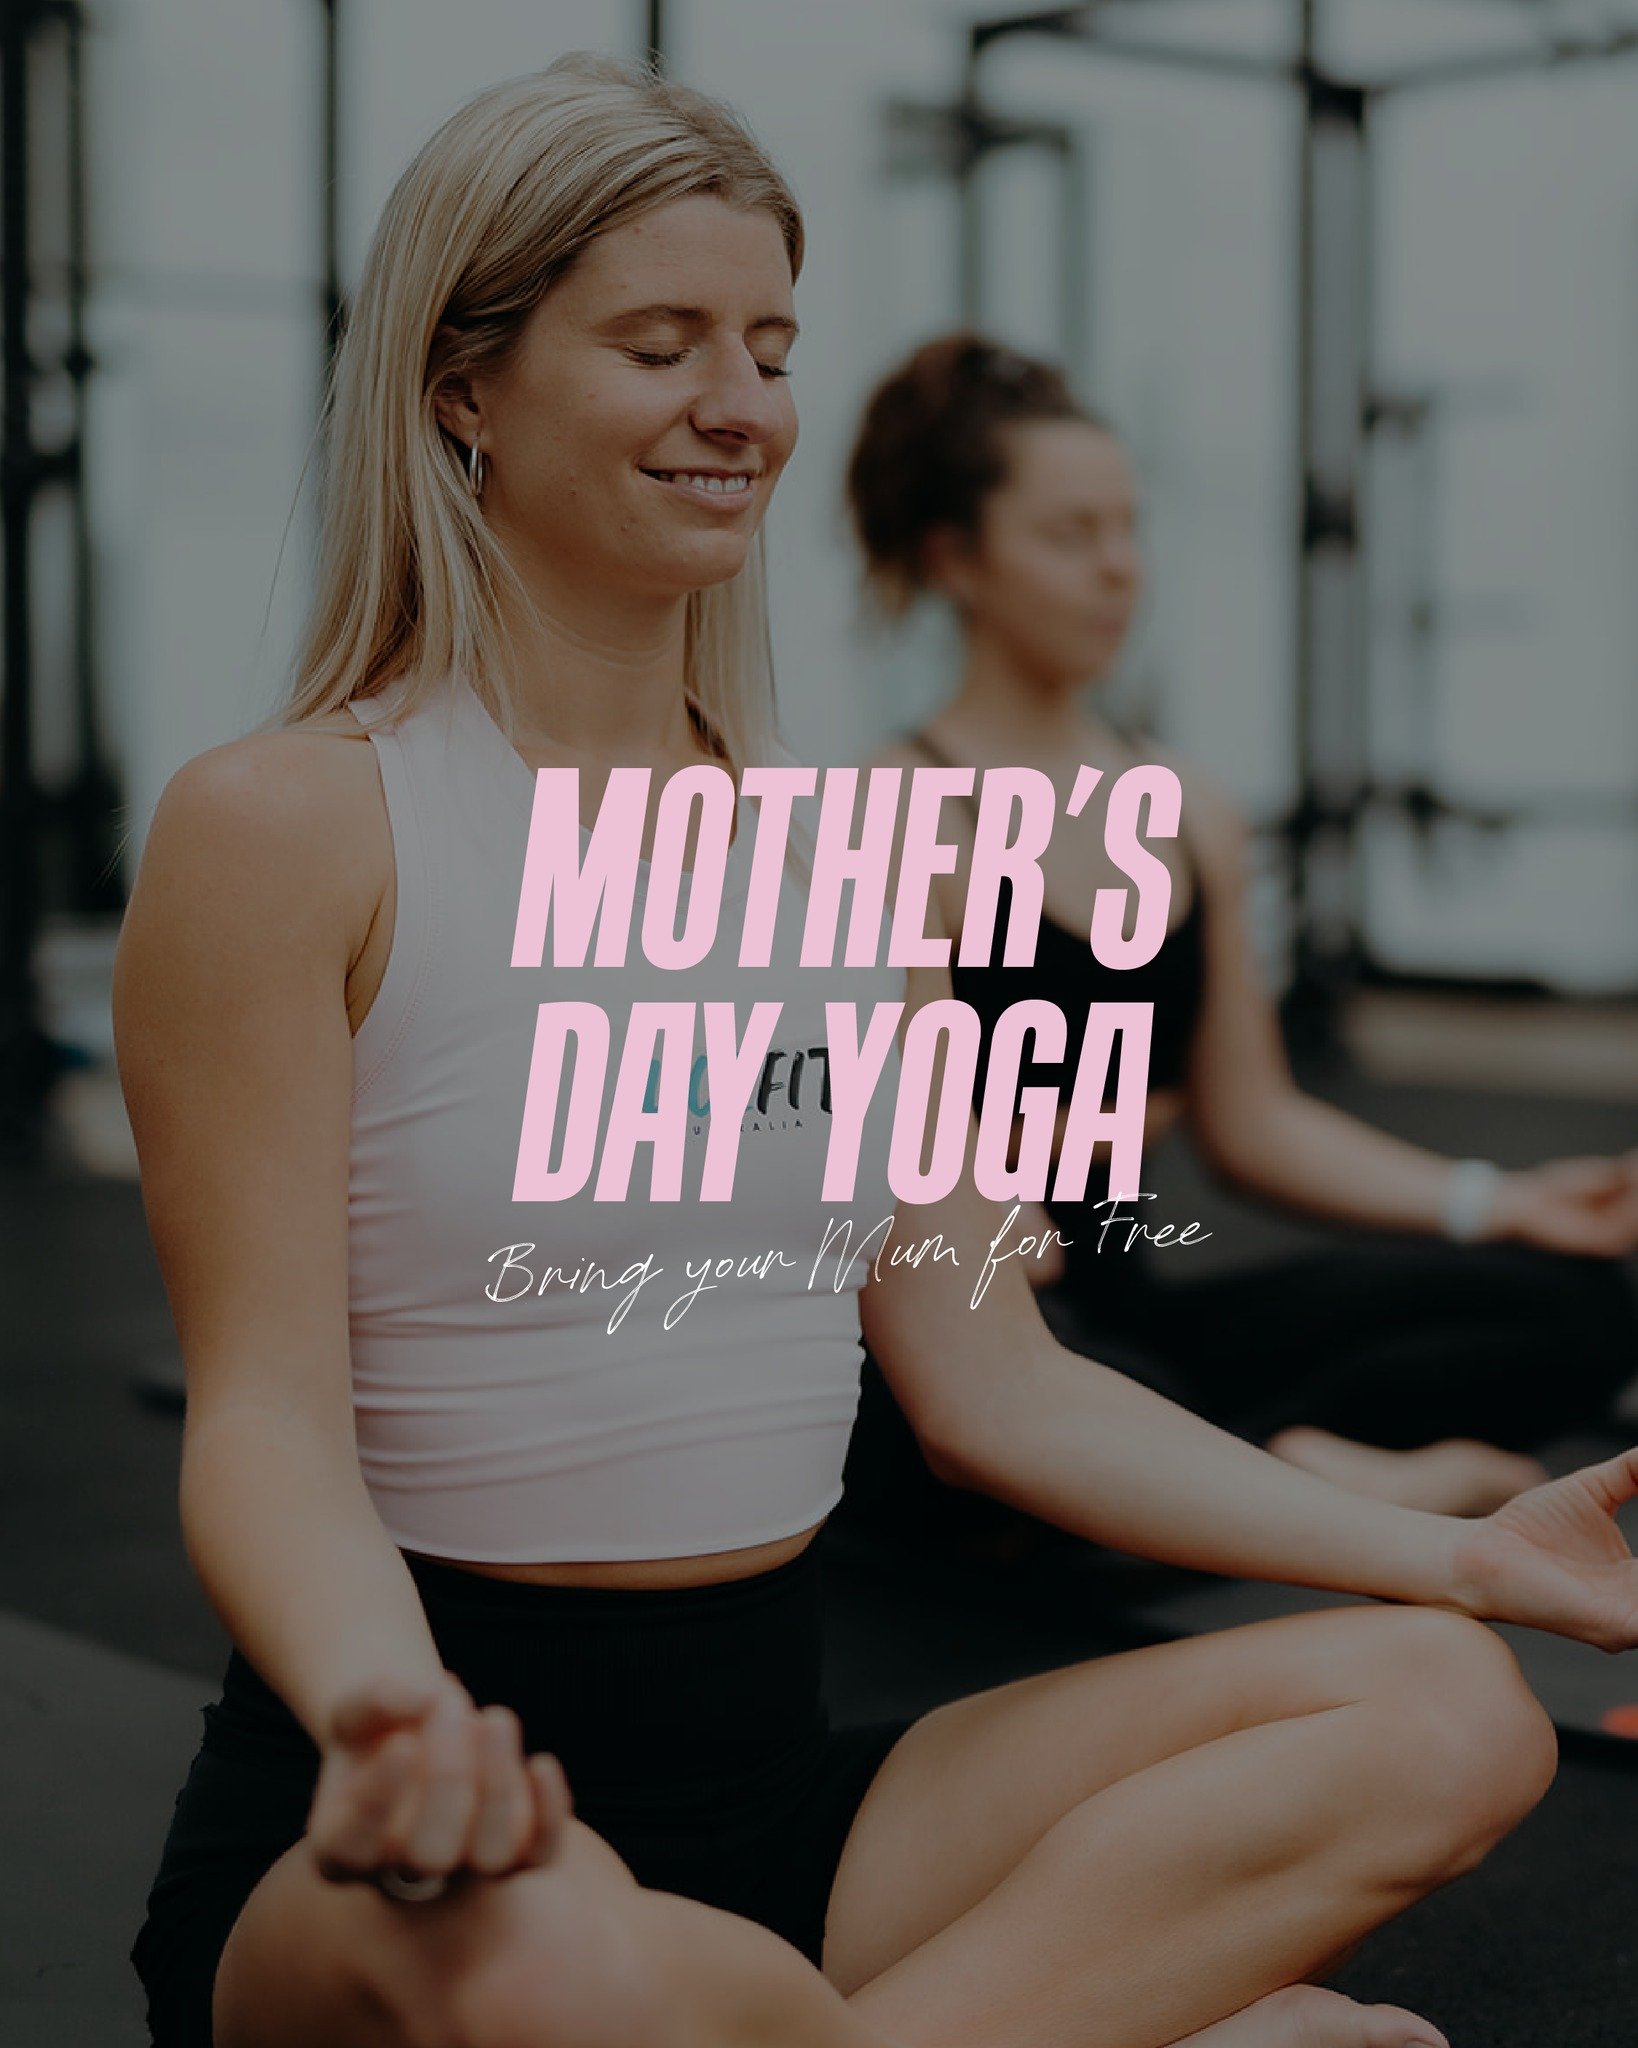 Bring your Mum for free this Mother's Day 💗

Connect with yourself, your breath and your loved one this Sunday for a heart-warming slow Vinyasa flow.

Book into ZEN at 4pm Sunday with resident yogi, Nicola. 
Simply tap the + button next to &quot;bri